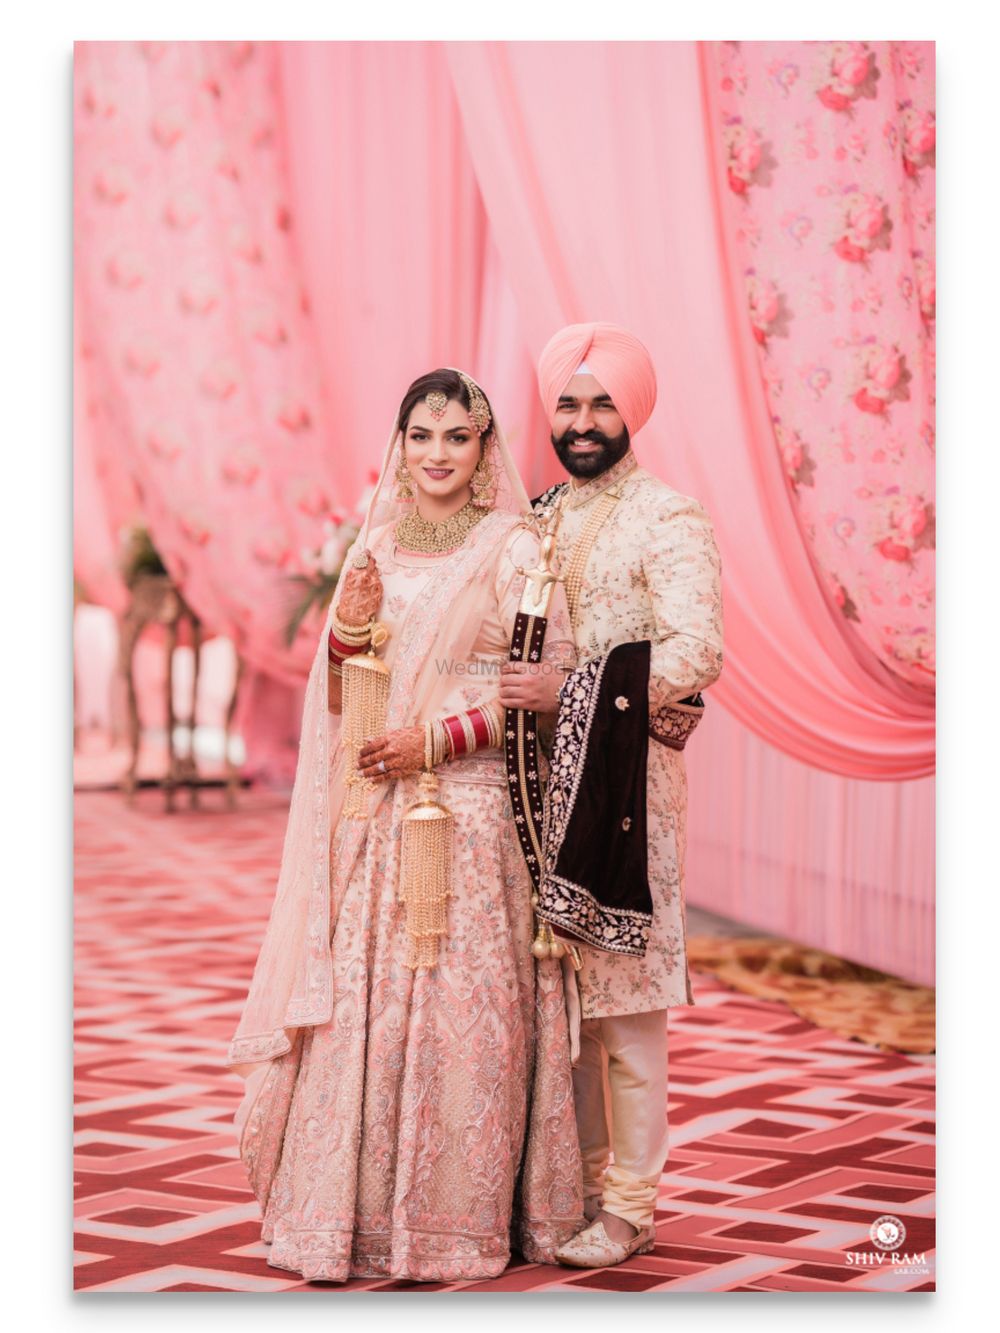 Photo From Sikh Royal  Wedding - By Shivram Labs